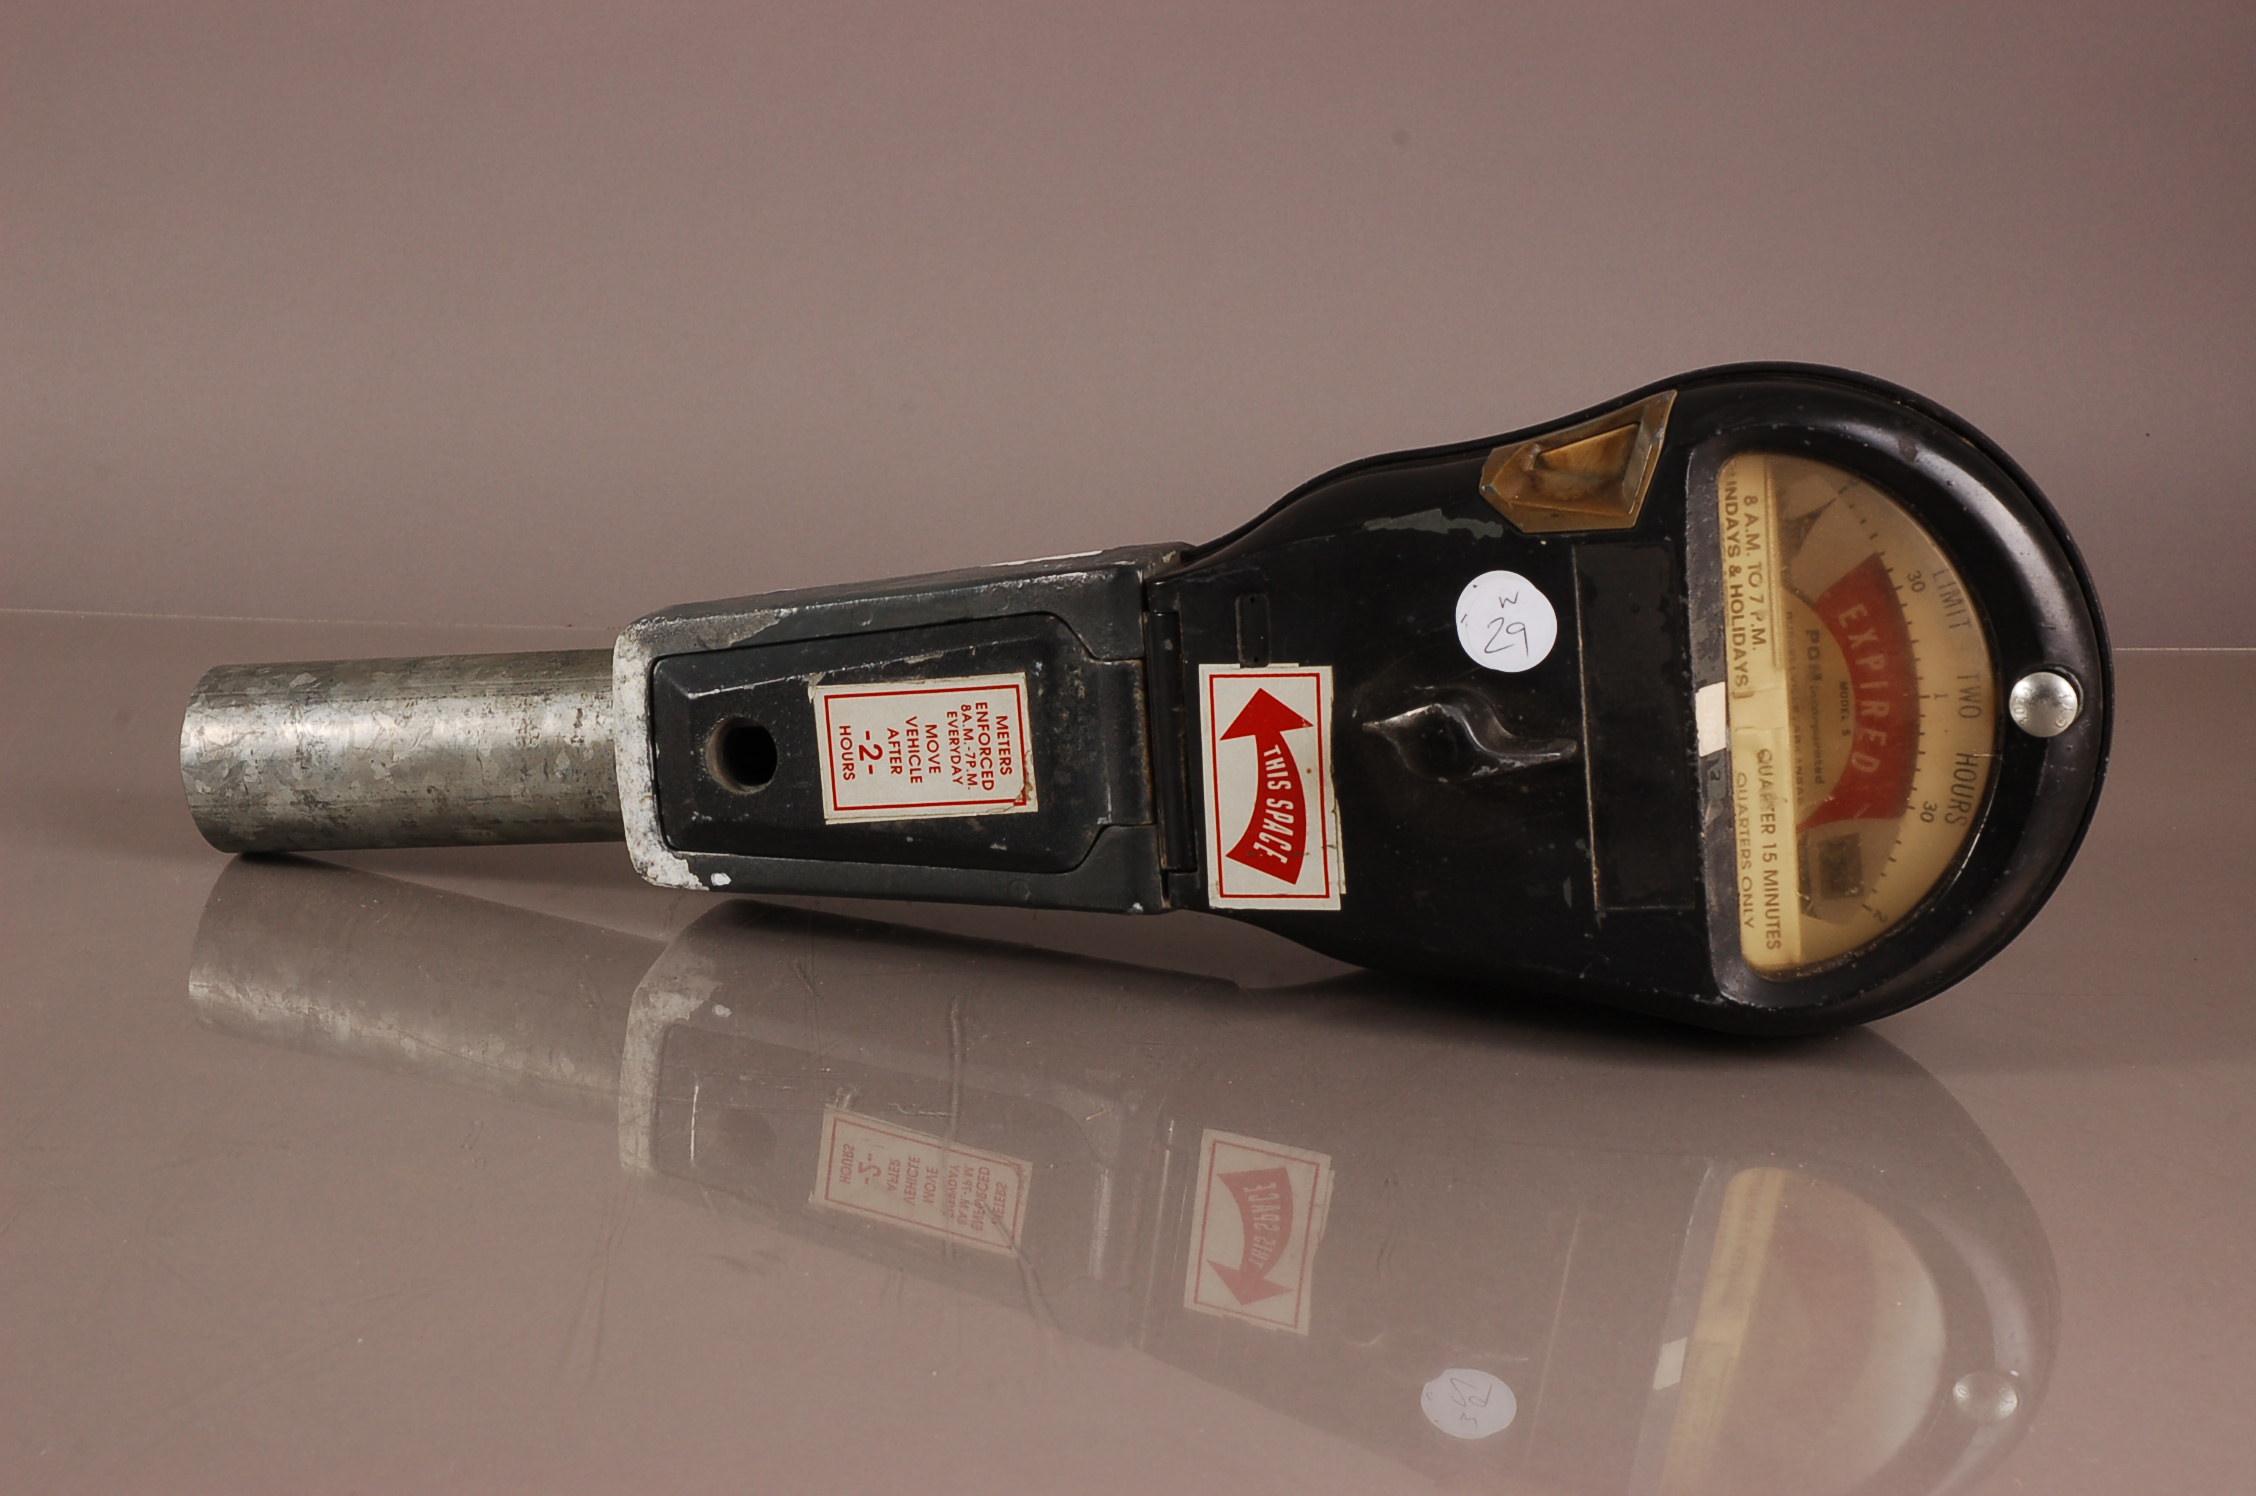 A vintage American car parking meter, the Model S by the POM incorporated company, cut off from